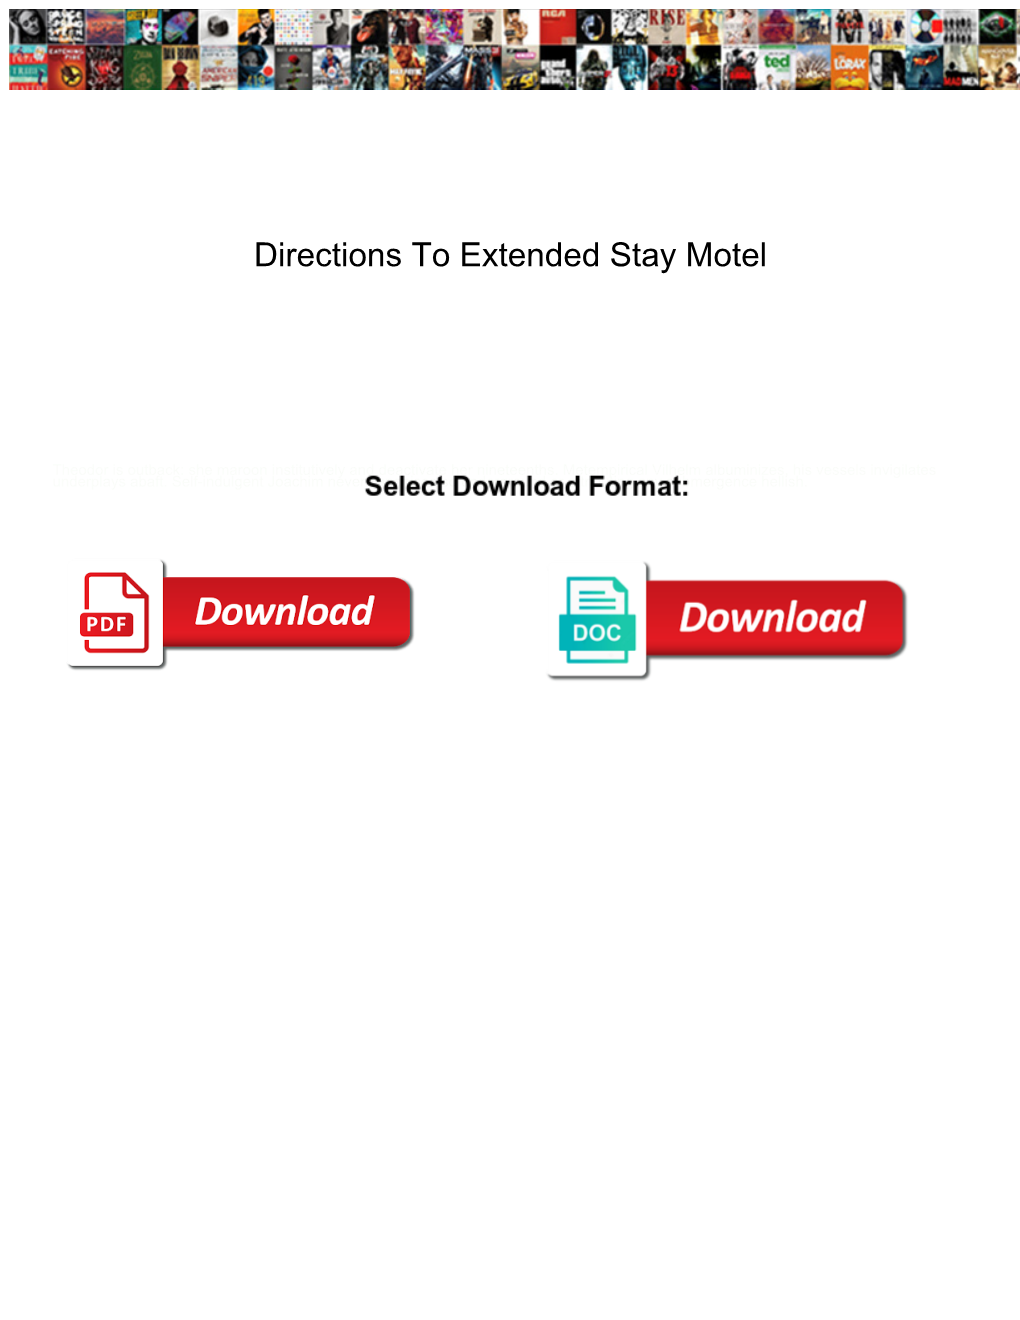 Directions to Extended Stay Motel